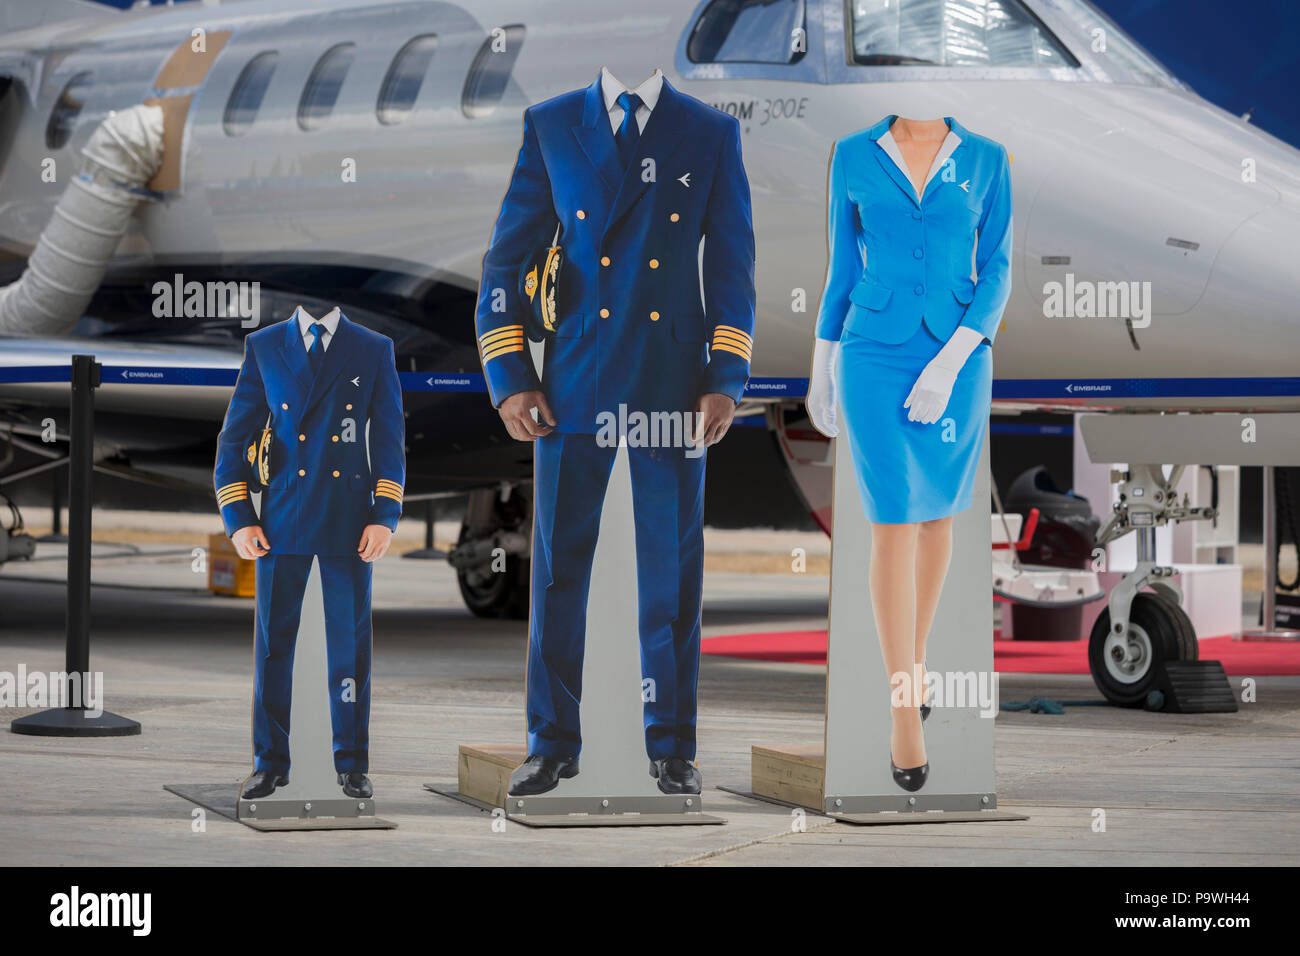 Headless cut-outs for visisors at the Embraer exhibit at the Farnborough Airshow, on 16th July 2018, in Farnborough, England. Stock Photo